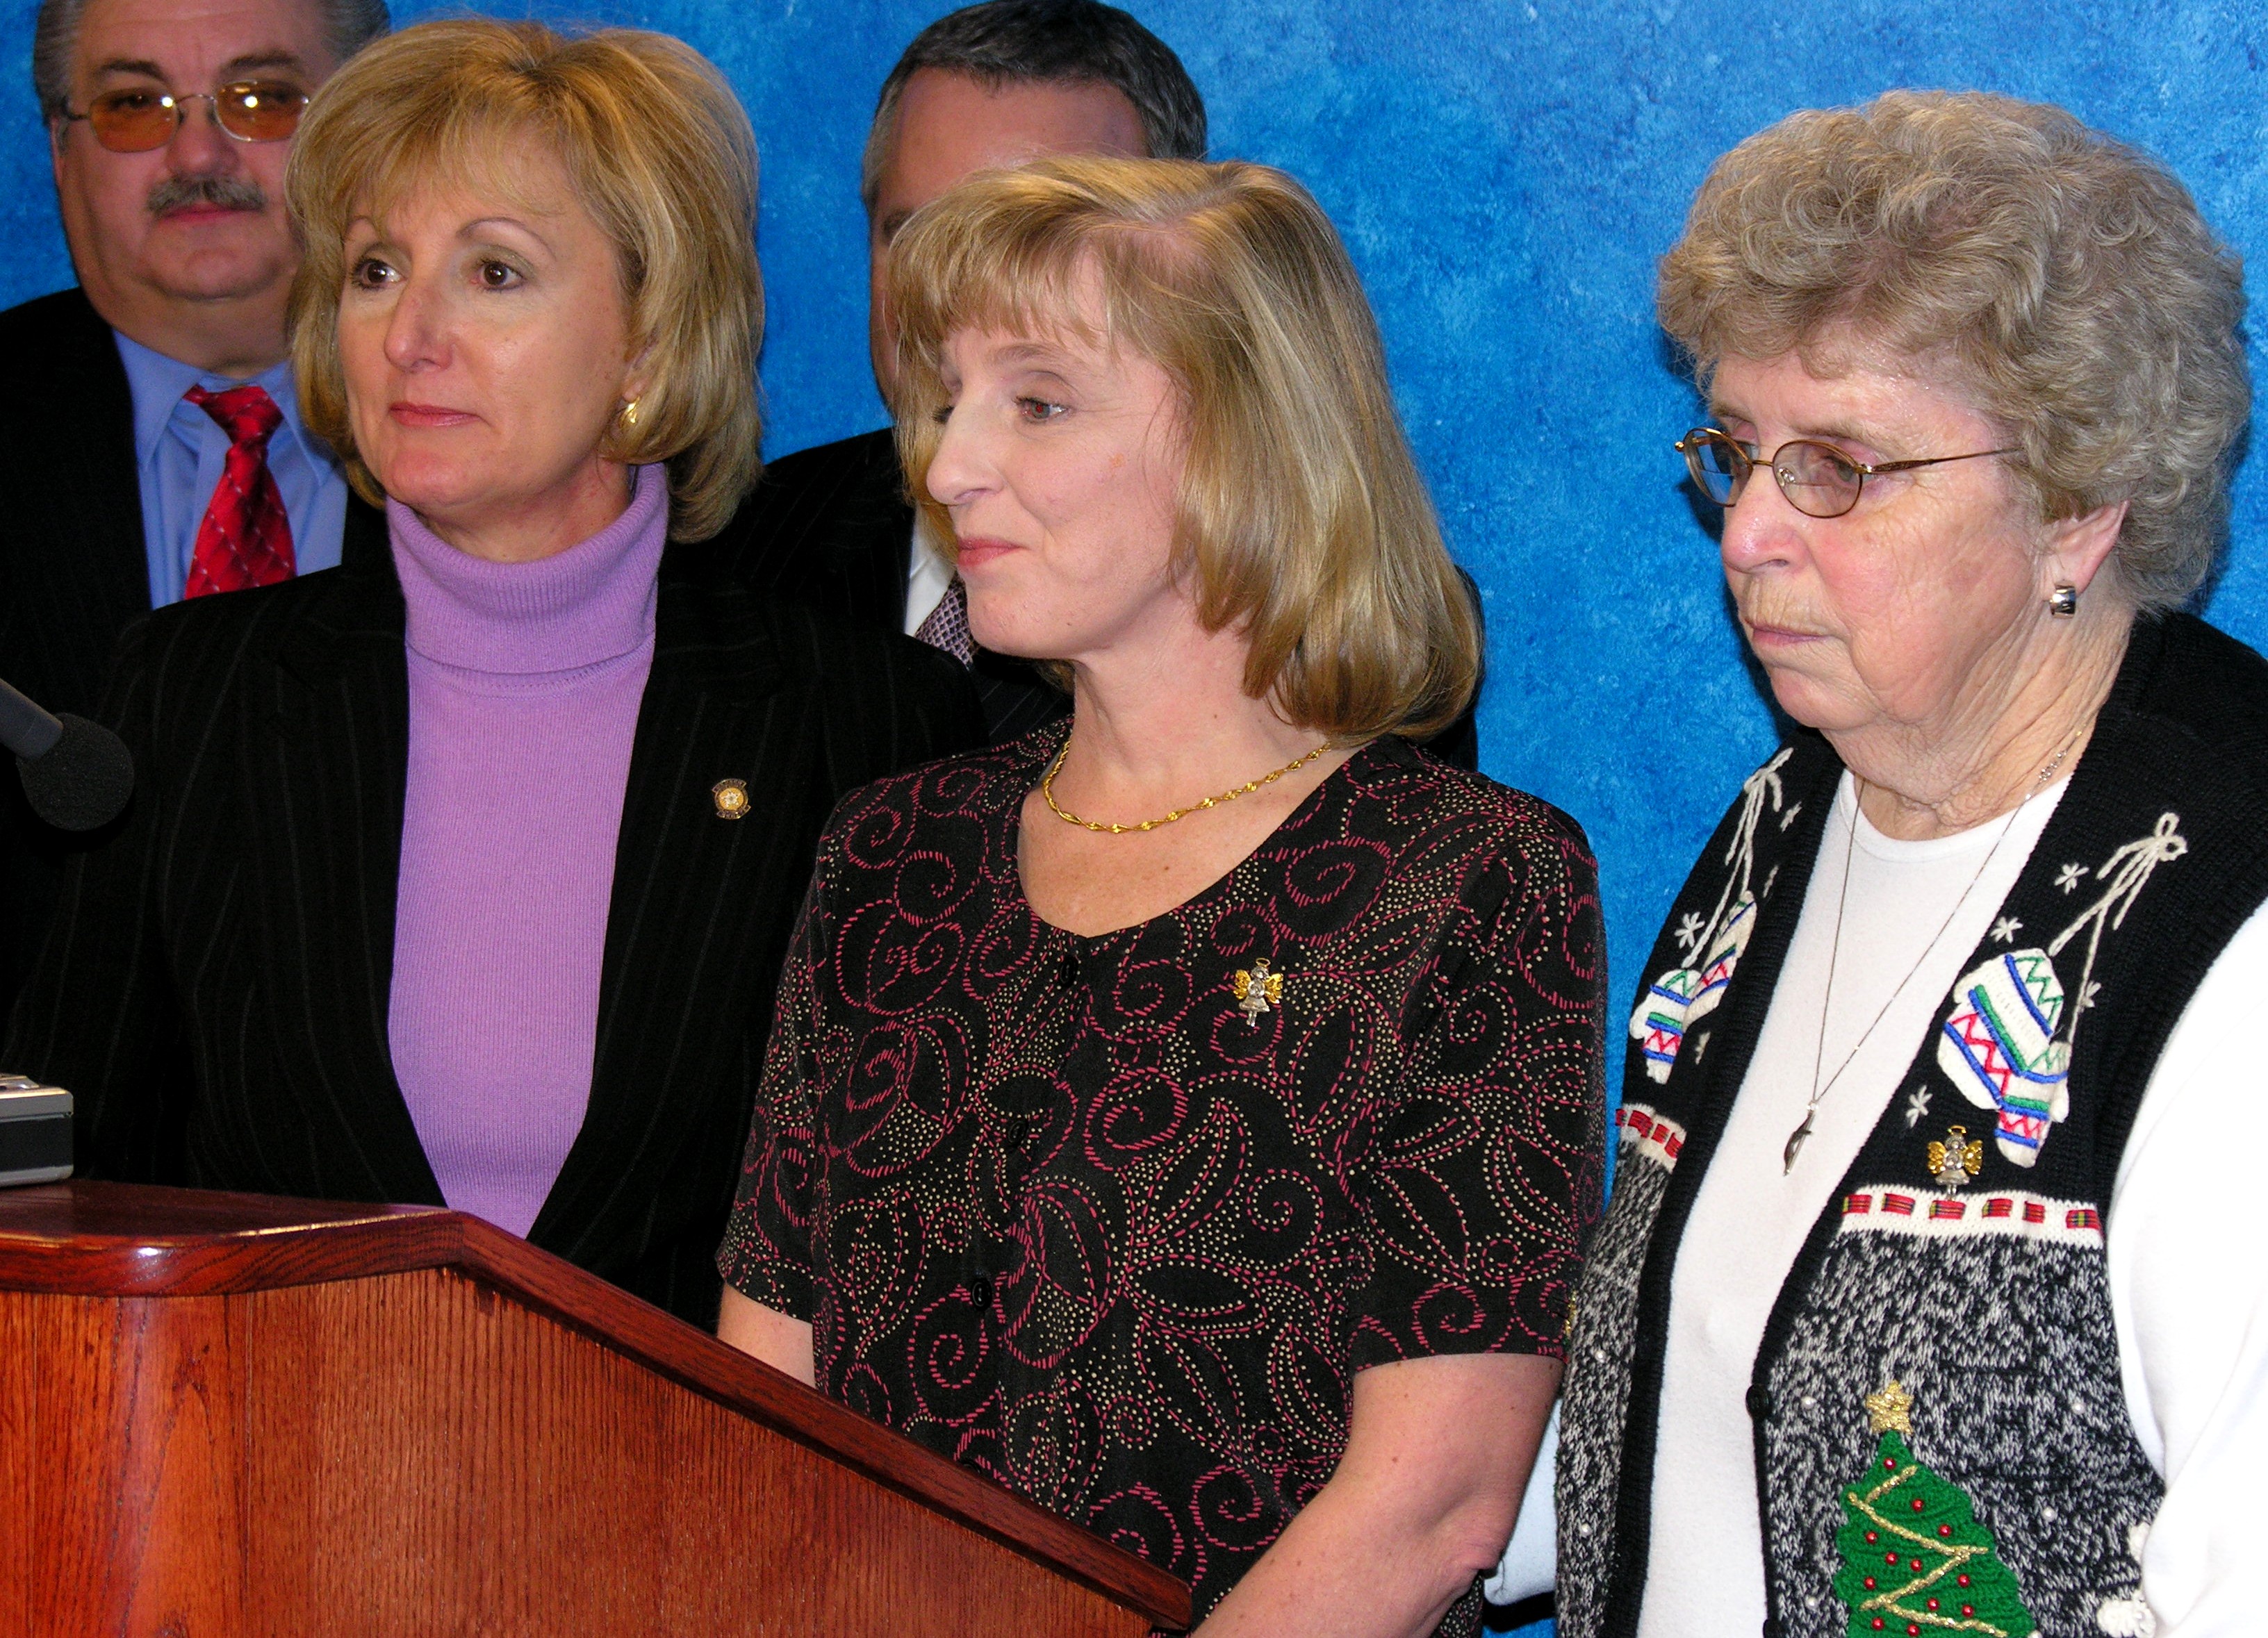 Senator Paddack, Caitlin's mother Donna Wooten and grandmother Joann Hood talk to the press about Caitlin's Law.